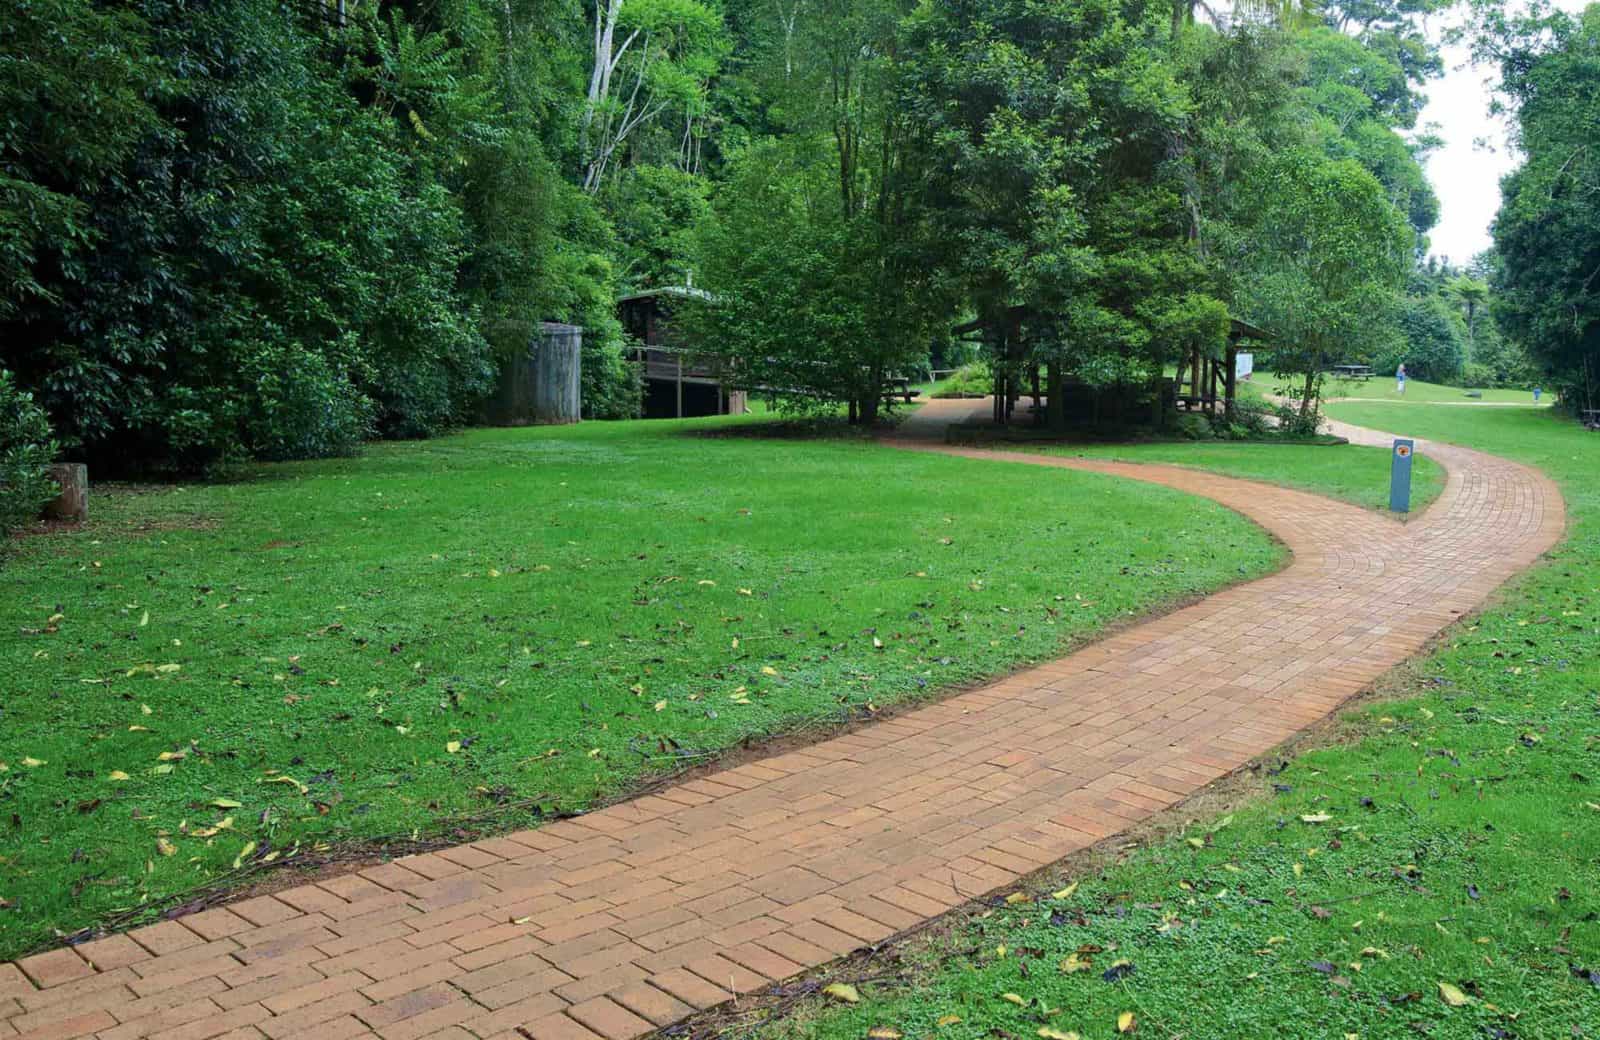 Glade picnic area. Photo: Rob Cleary